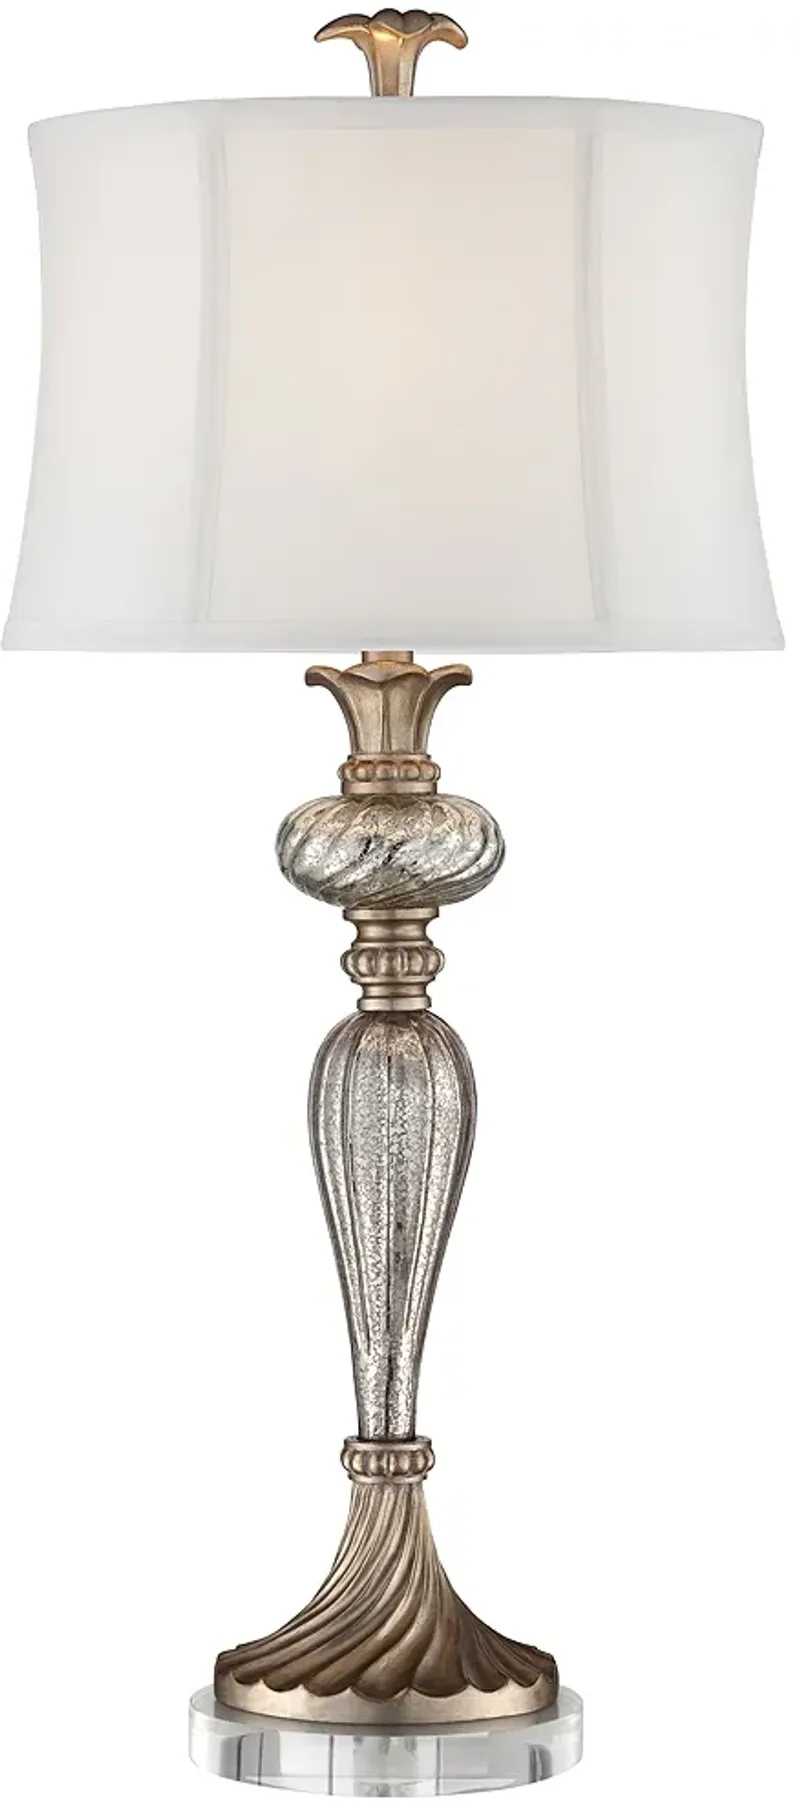 Alyson Mercury Glass Table Lamp With 7" Wide Round Riser